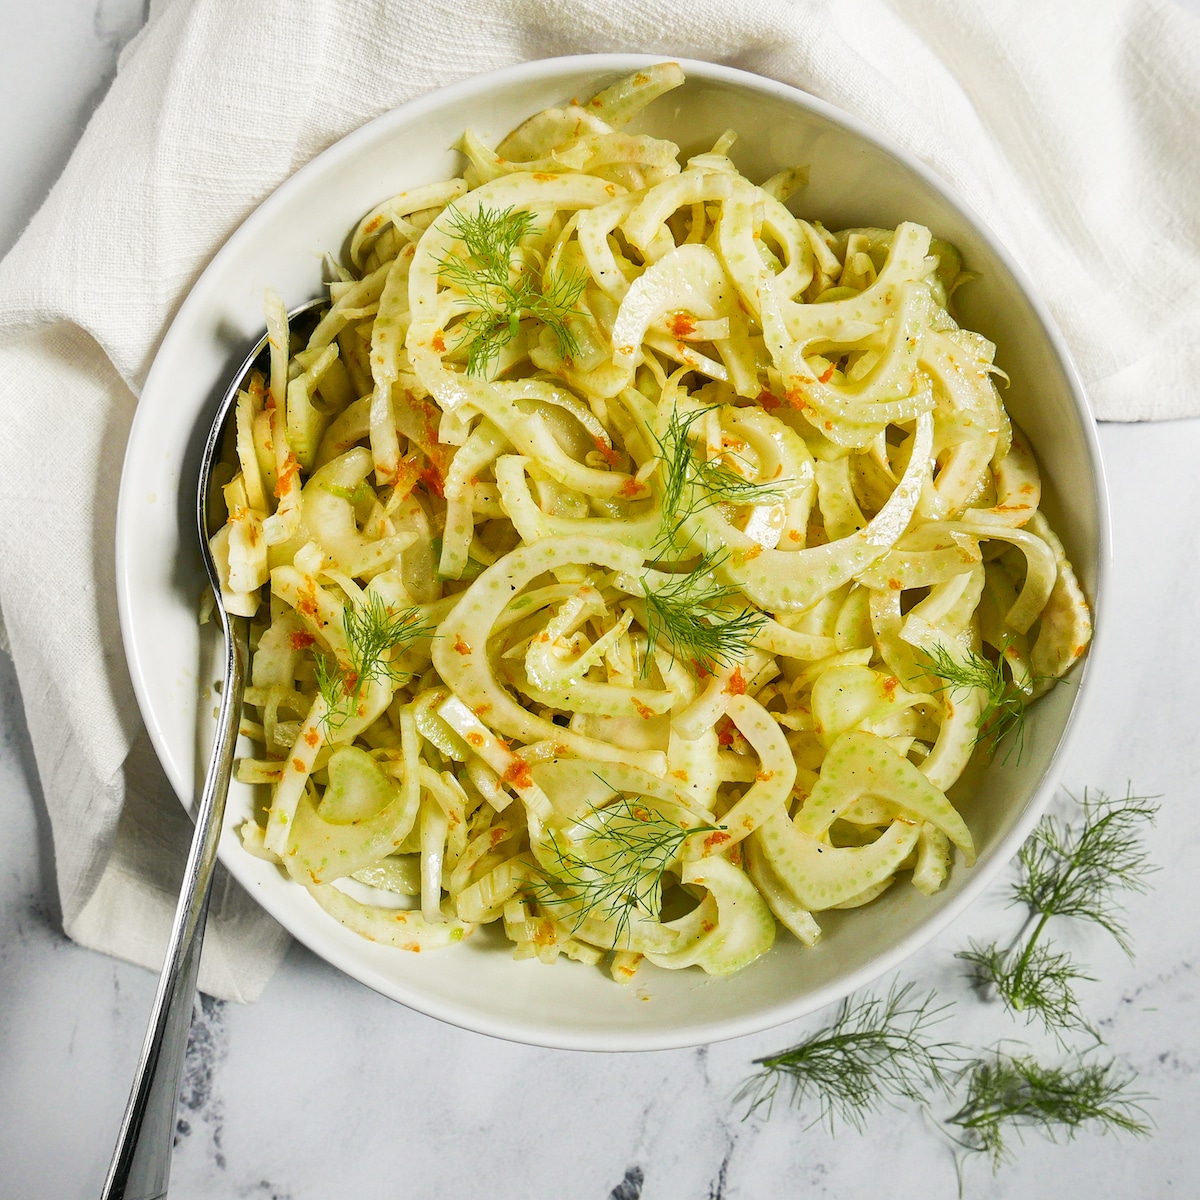 fennel salad garnished with fennel fronds and resting on a white napkin.